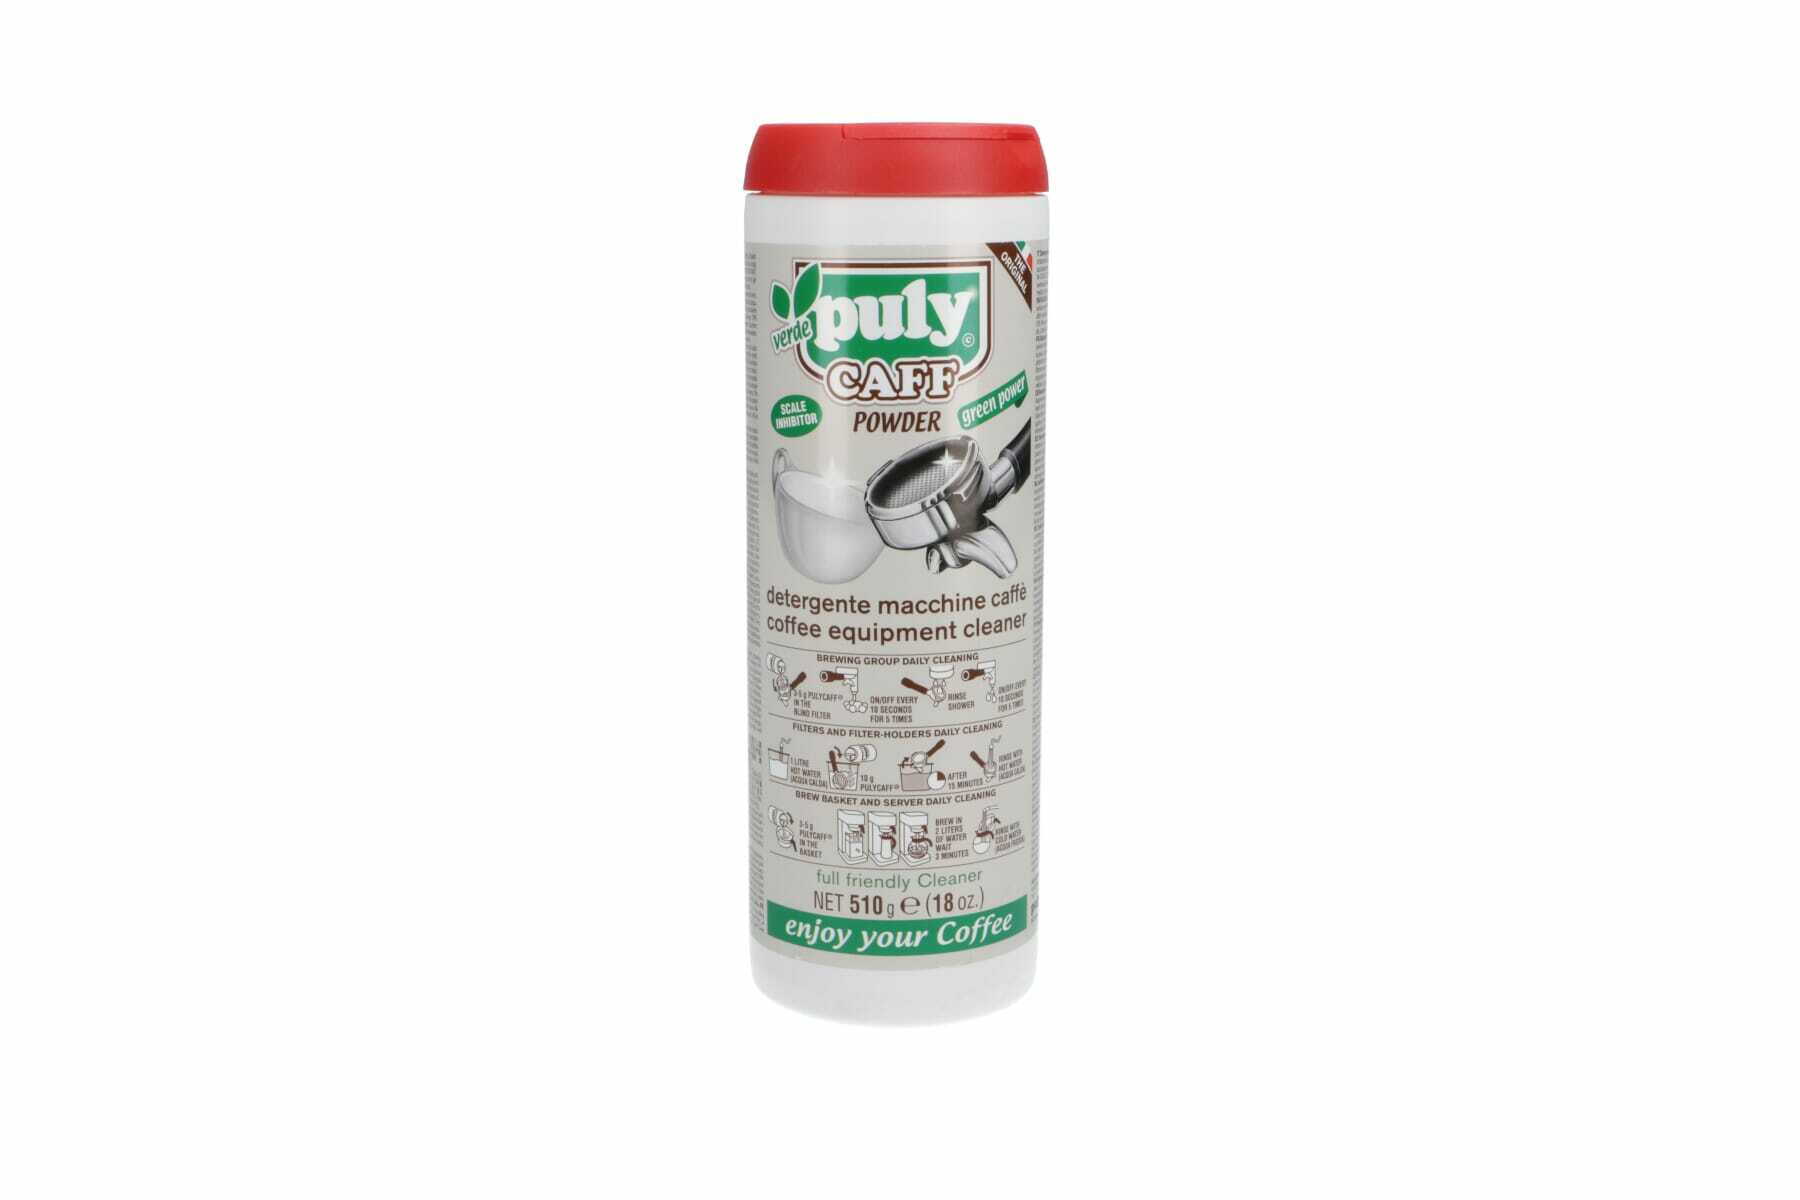 Puly-Cafe Powder Wholesaler and Supplier in Kuwait (Powder for Espresso Machines and Parts Cleaning)